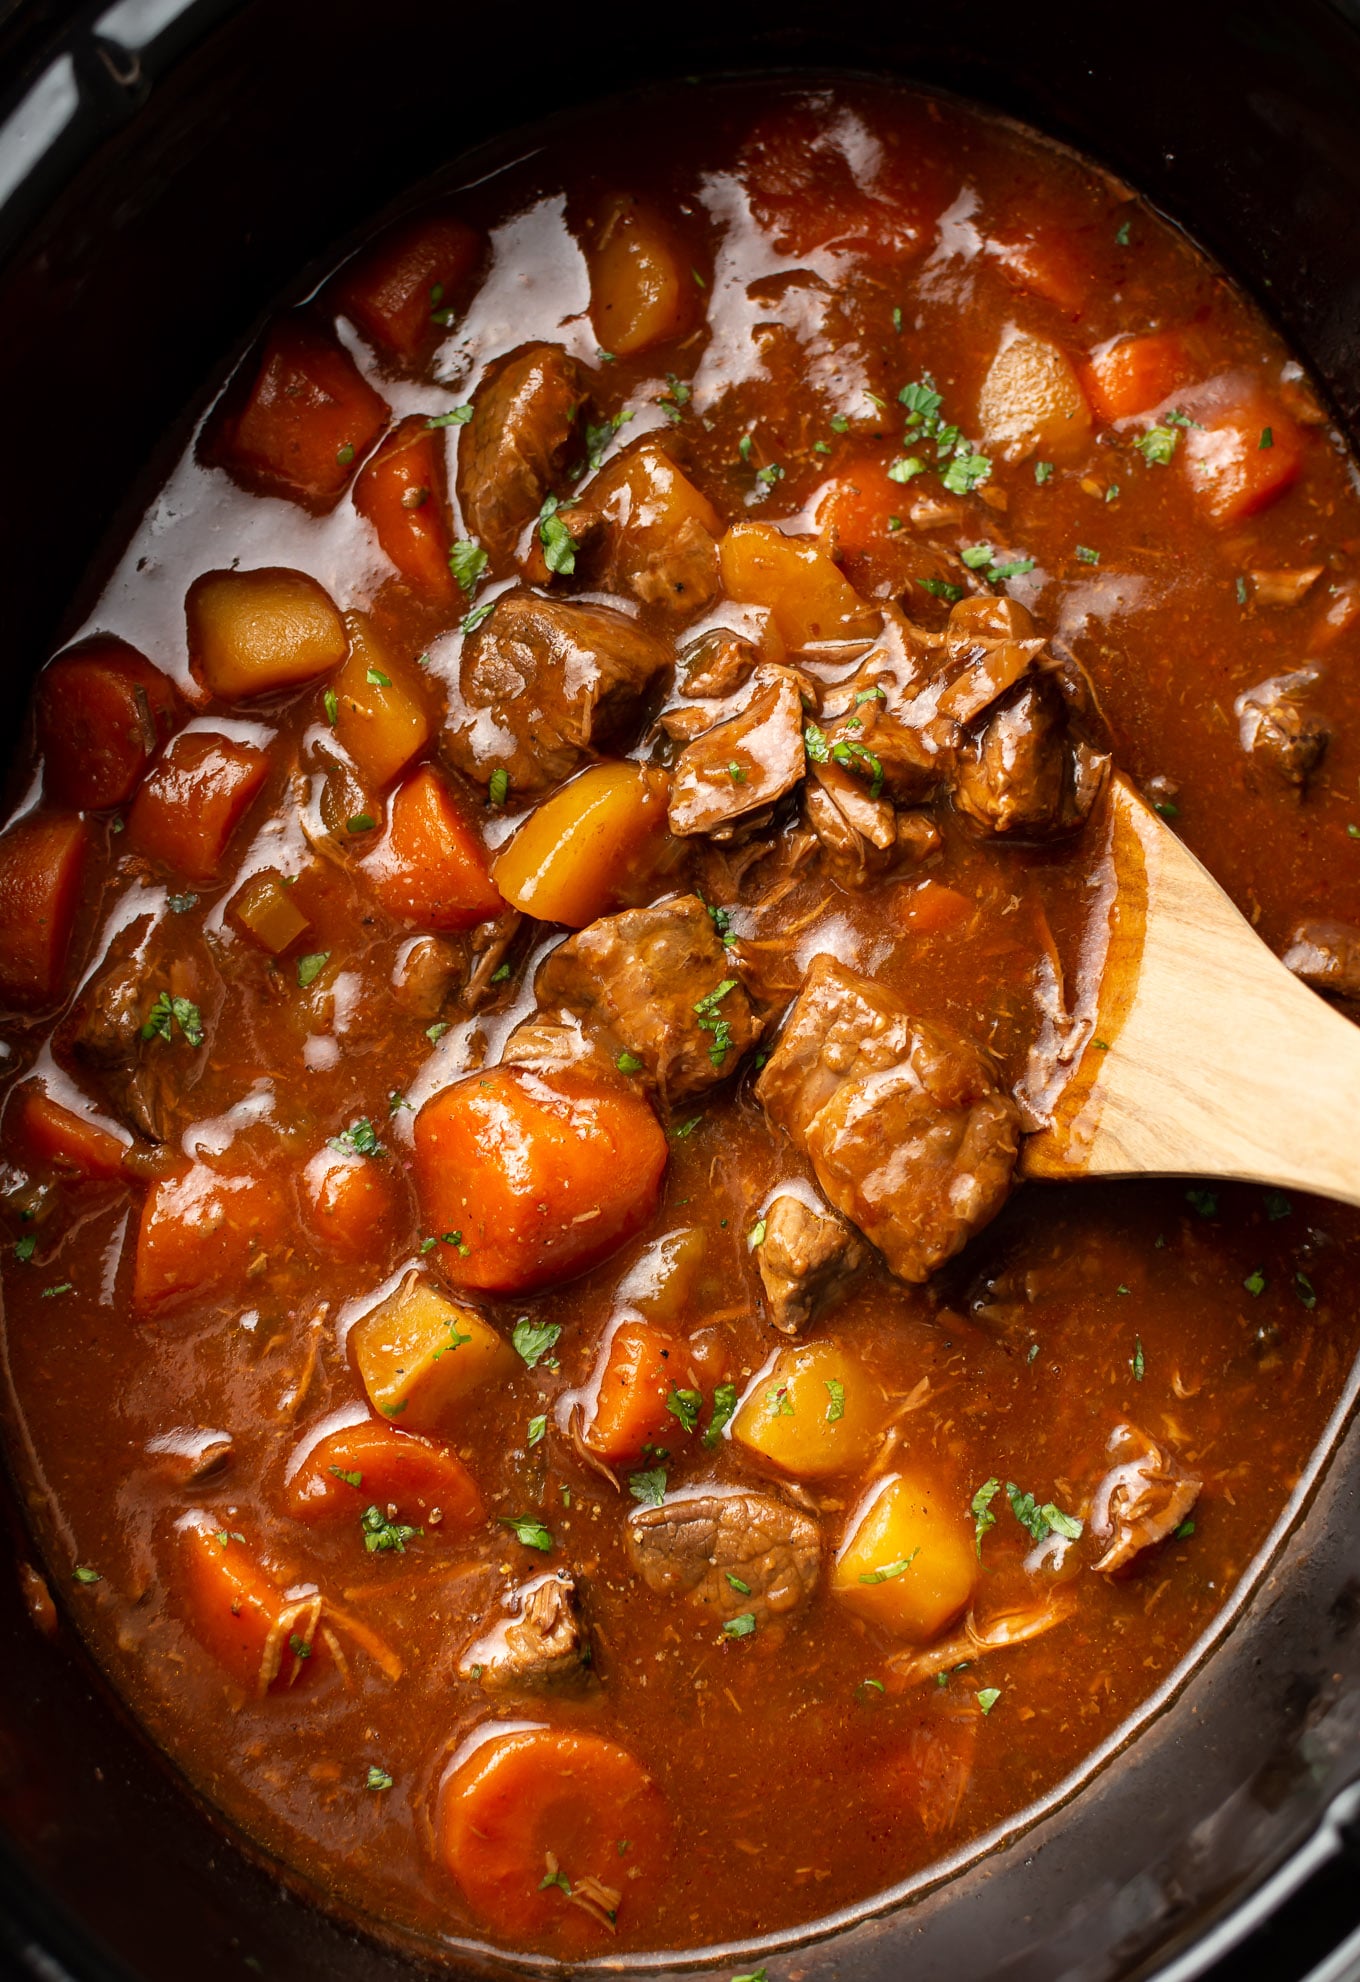 Beef stew using our slow cooker for the first time : r/slowcooking